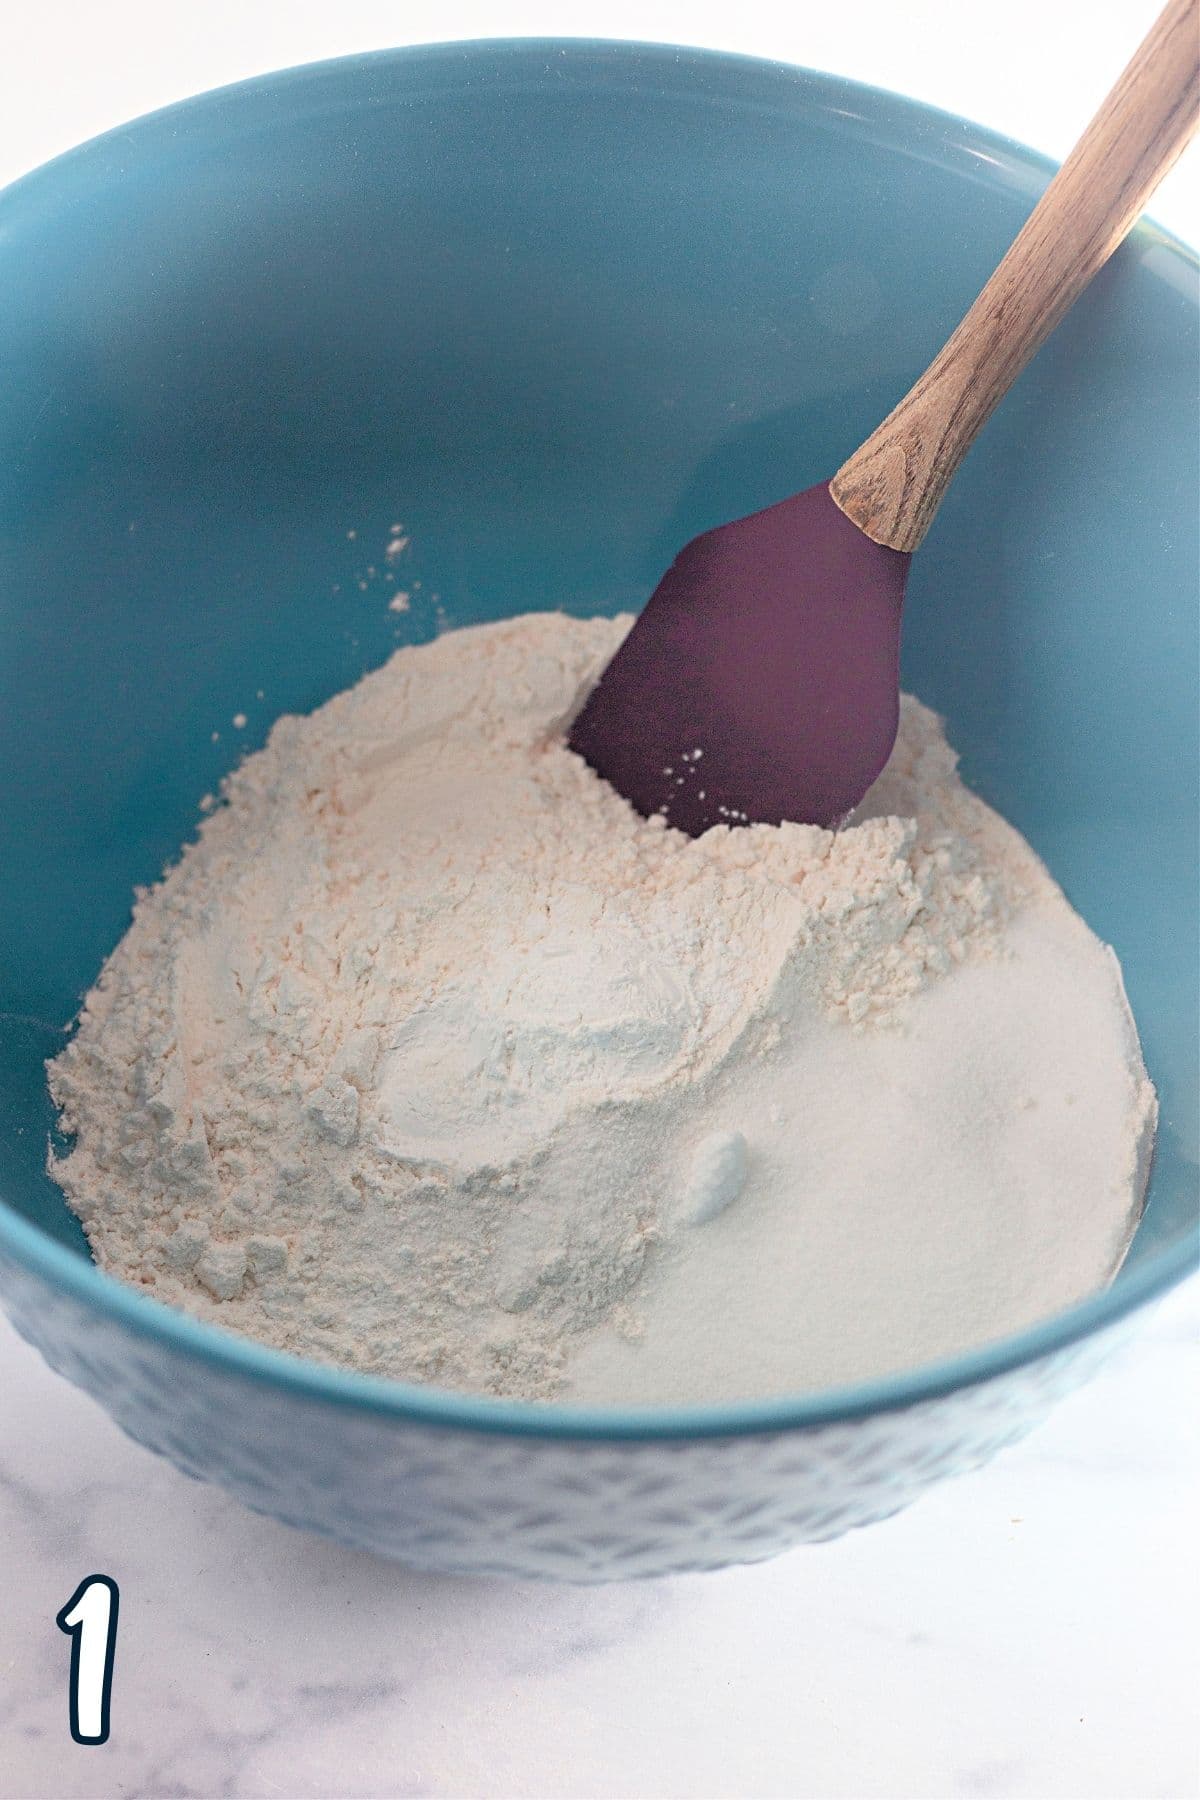 Flour, baking powder, and salt in a blue mixing bowl. 